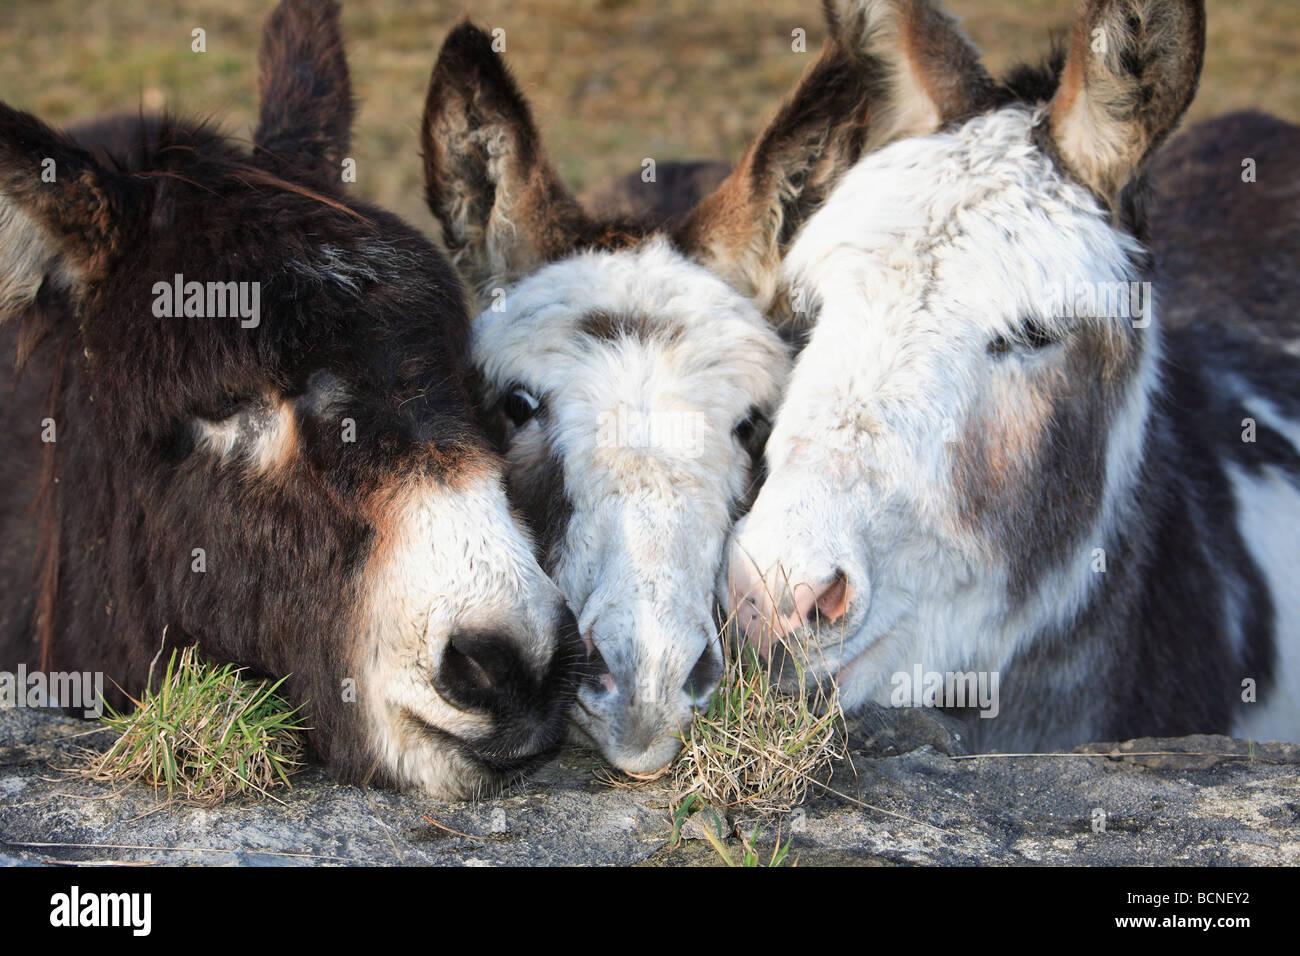 Three donkeys / asses looking over a wall photographed in Co